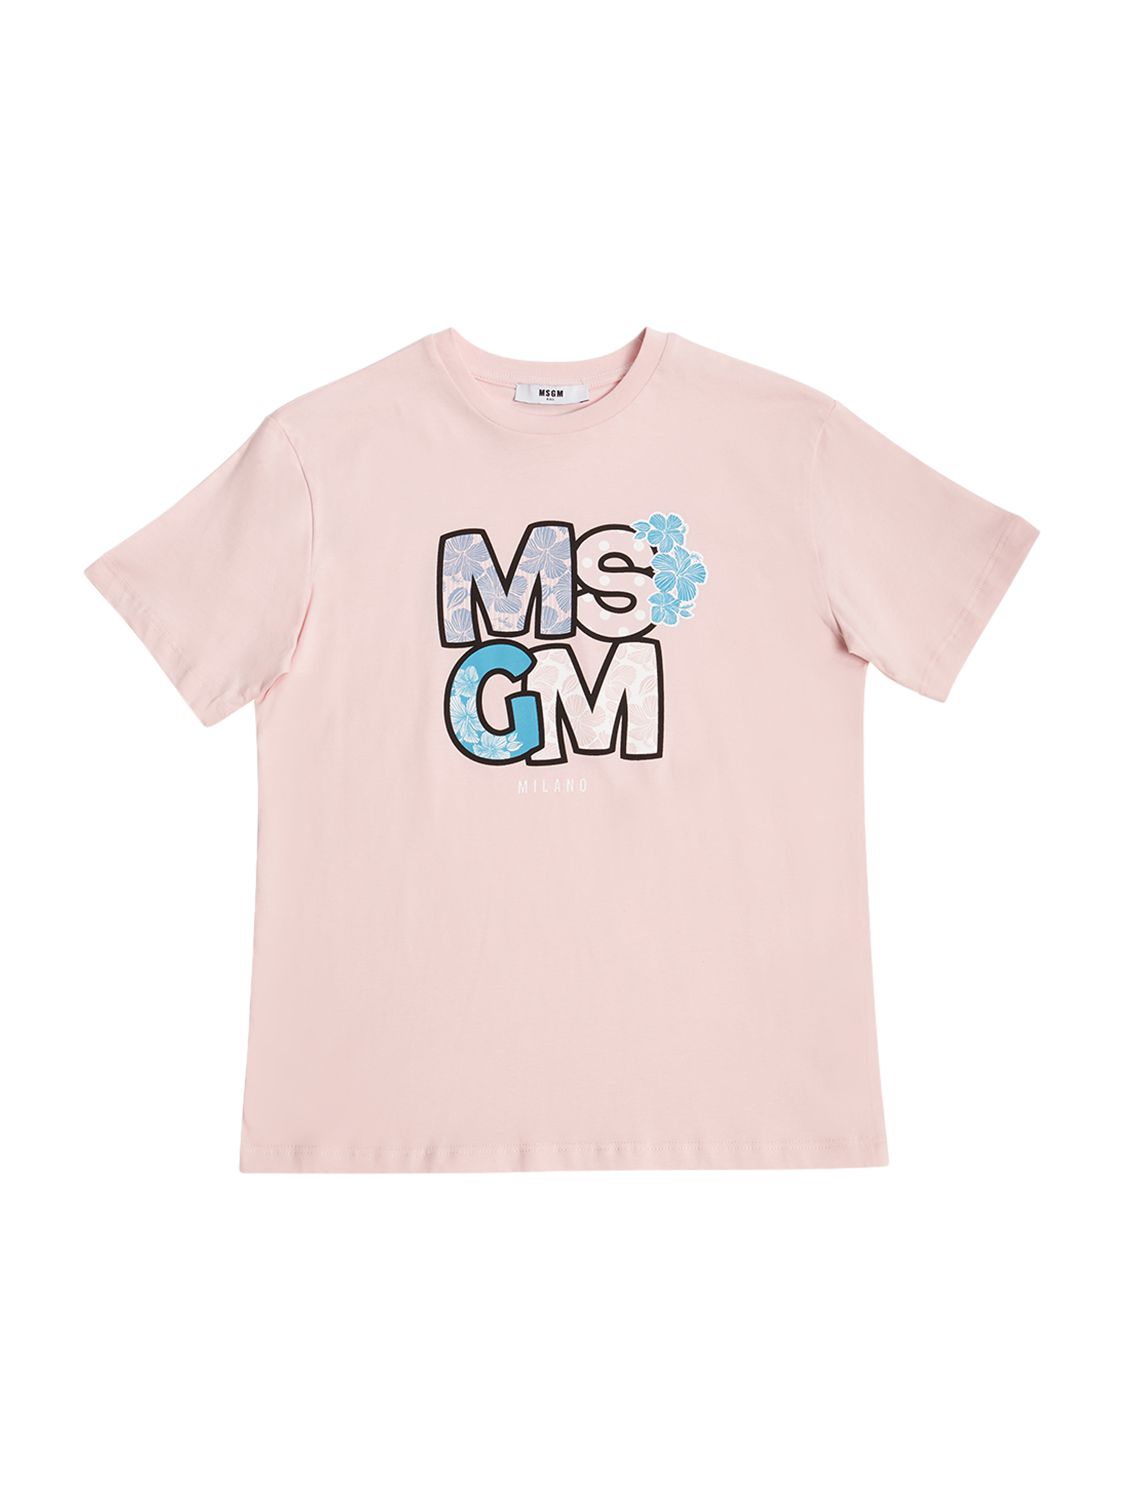 Msgm Kids' Printed Cotton Jersey T-shirt In Pink